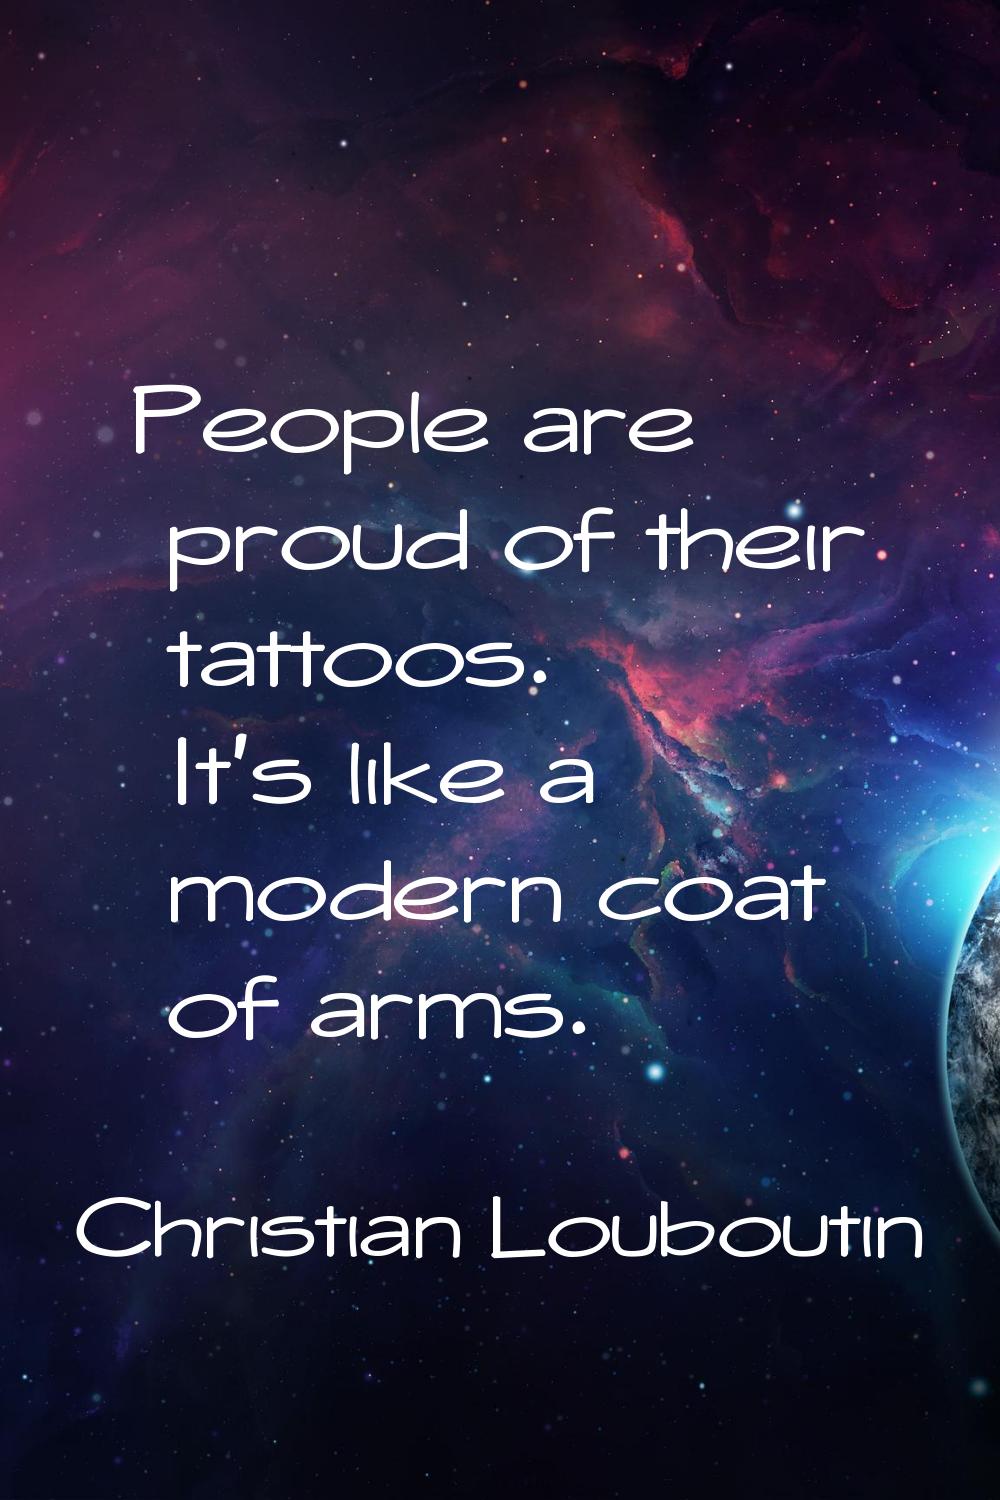 People are proud of their tattoos. It's like a modern coat of arms.